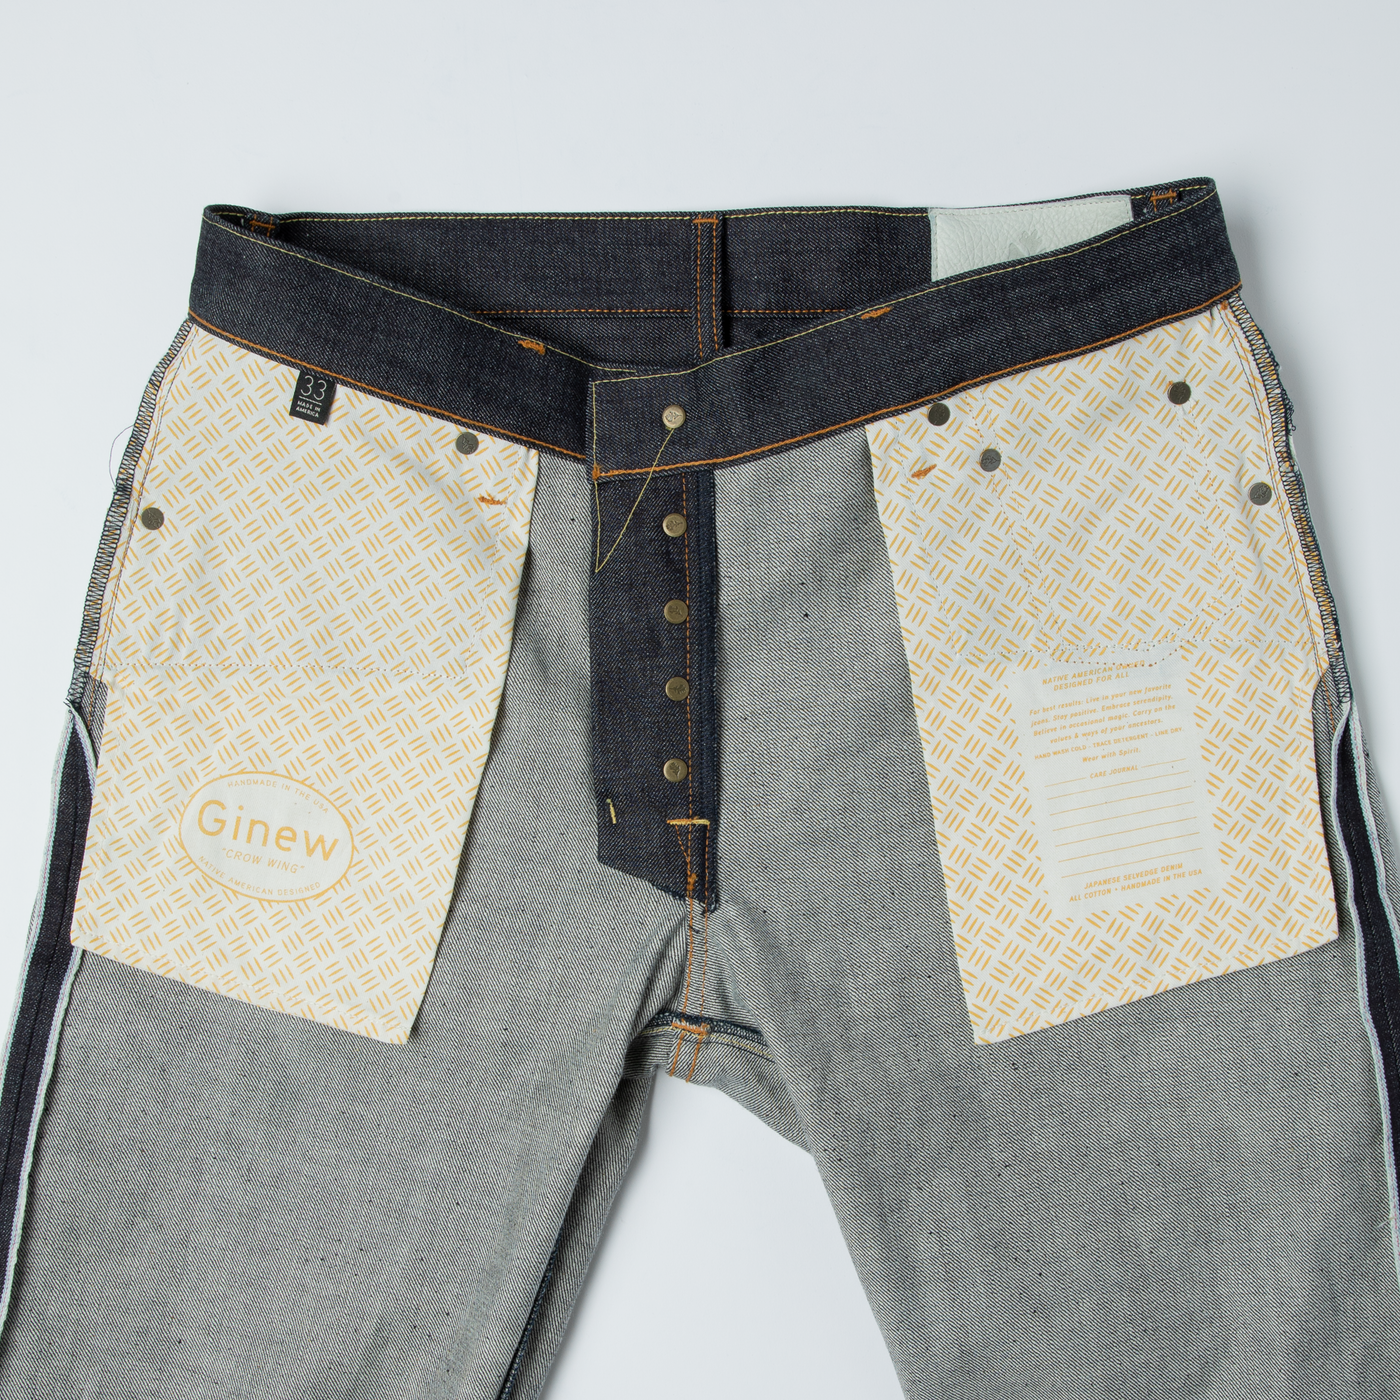 Pocket image close up on Selvedge denim jean with made in USA cotton 